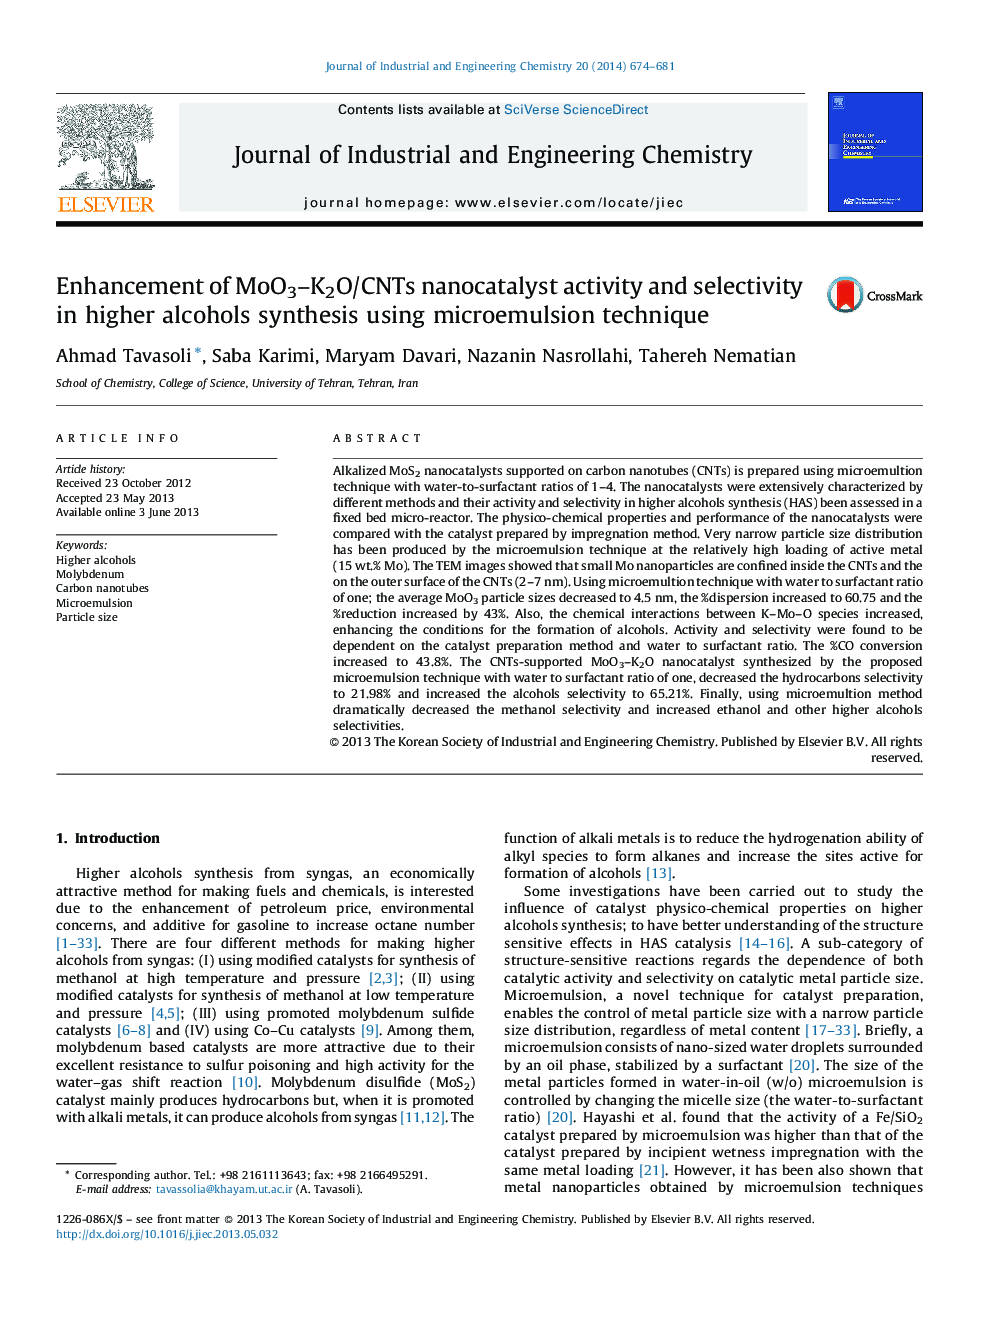 Enhancement of MoO3–K2O/CNTs nanocatalyst activity and selectivity in higher alcohols synthesis using microemulsion technique